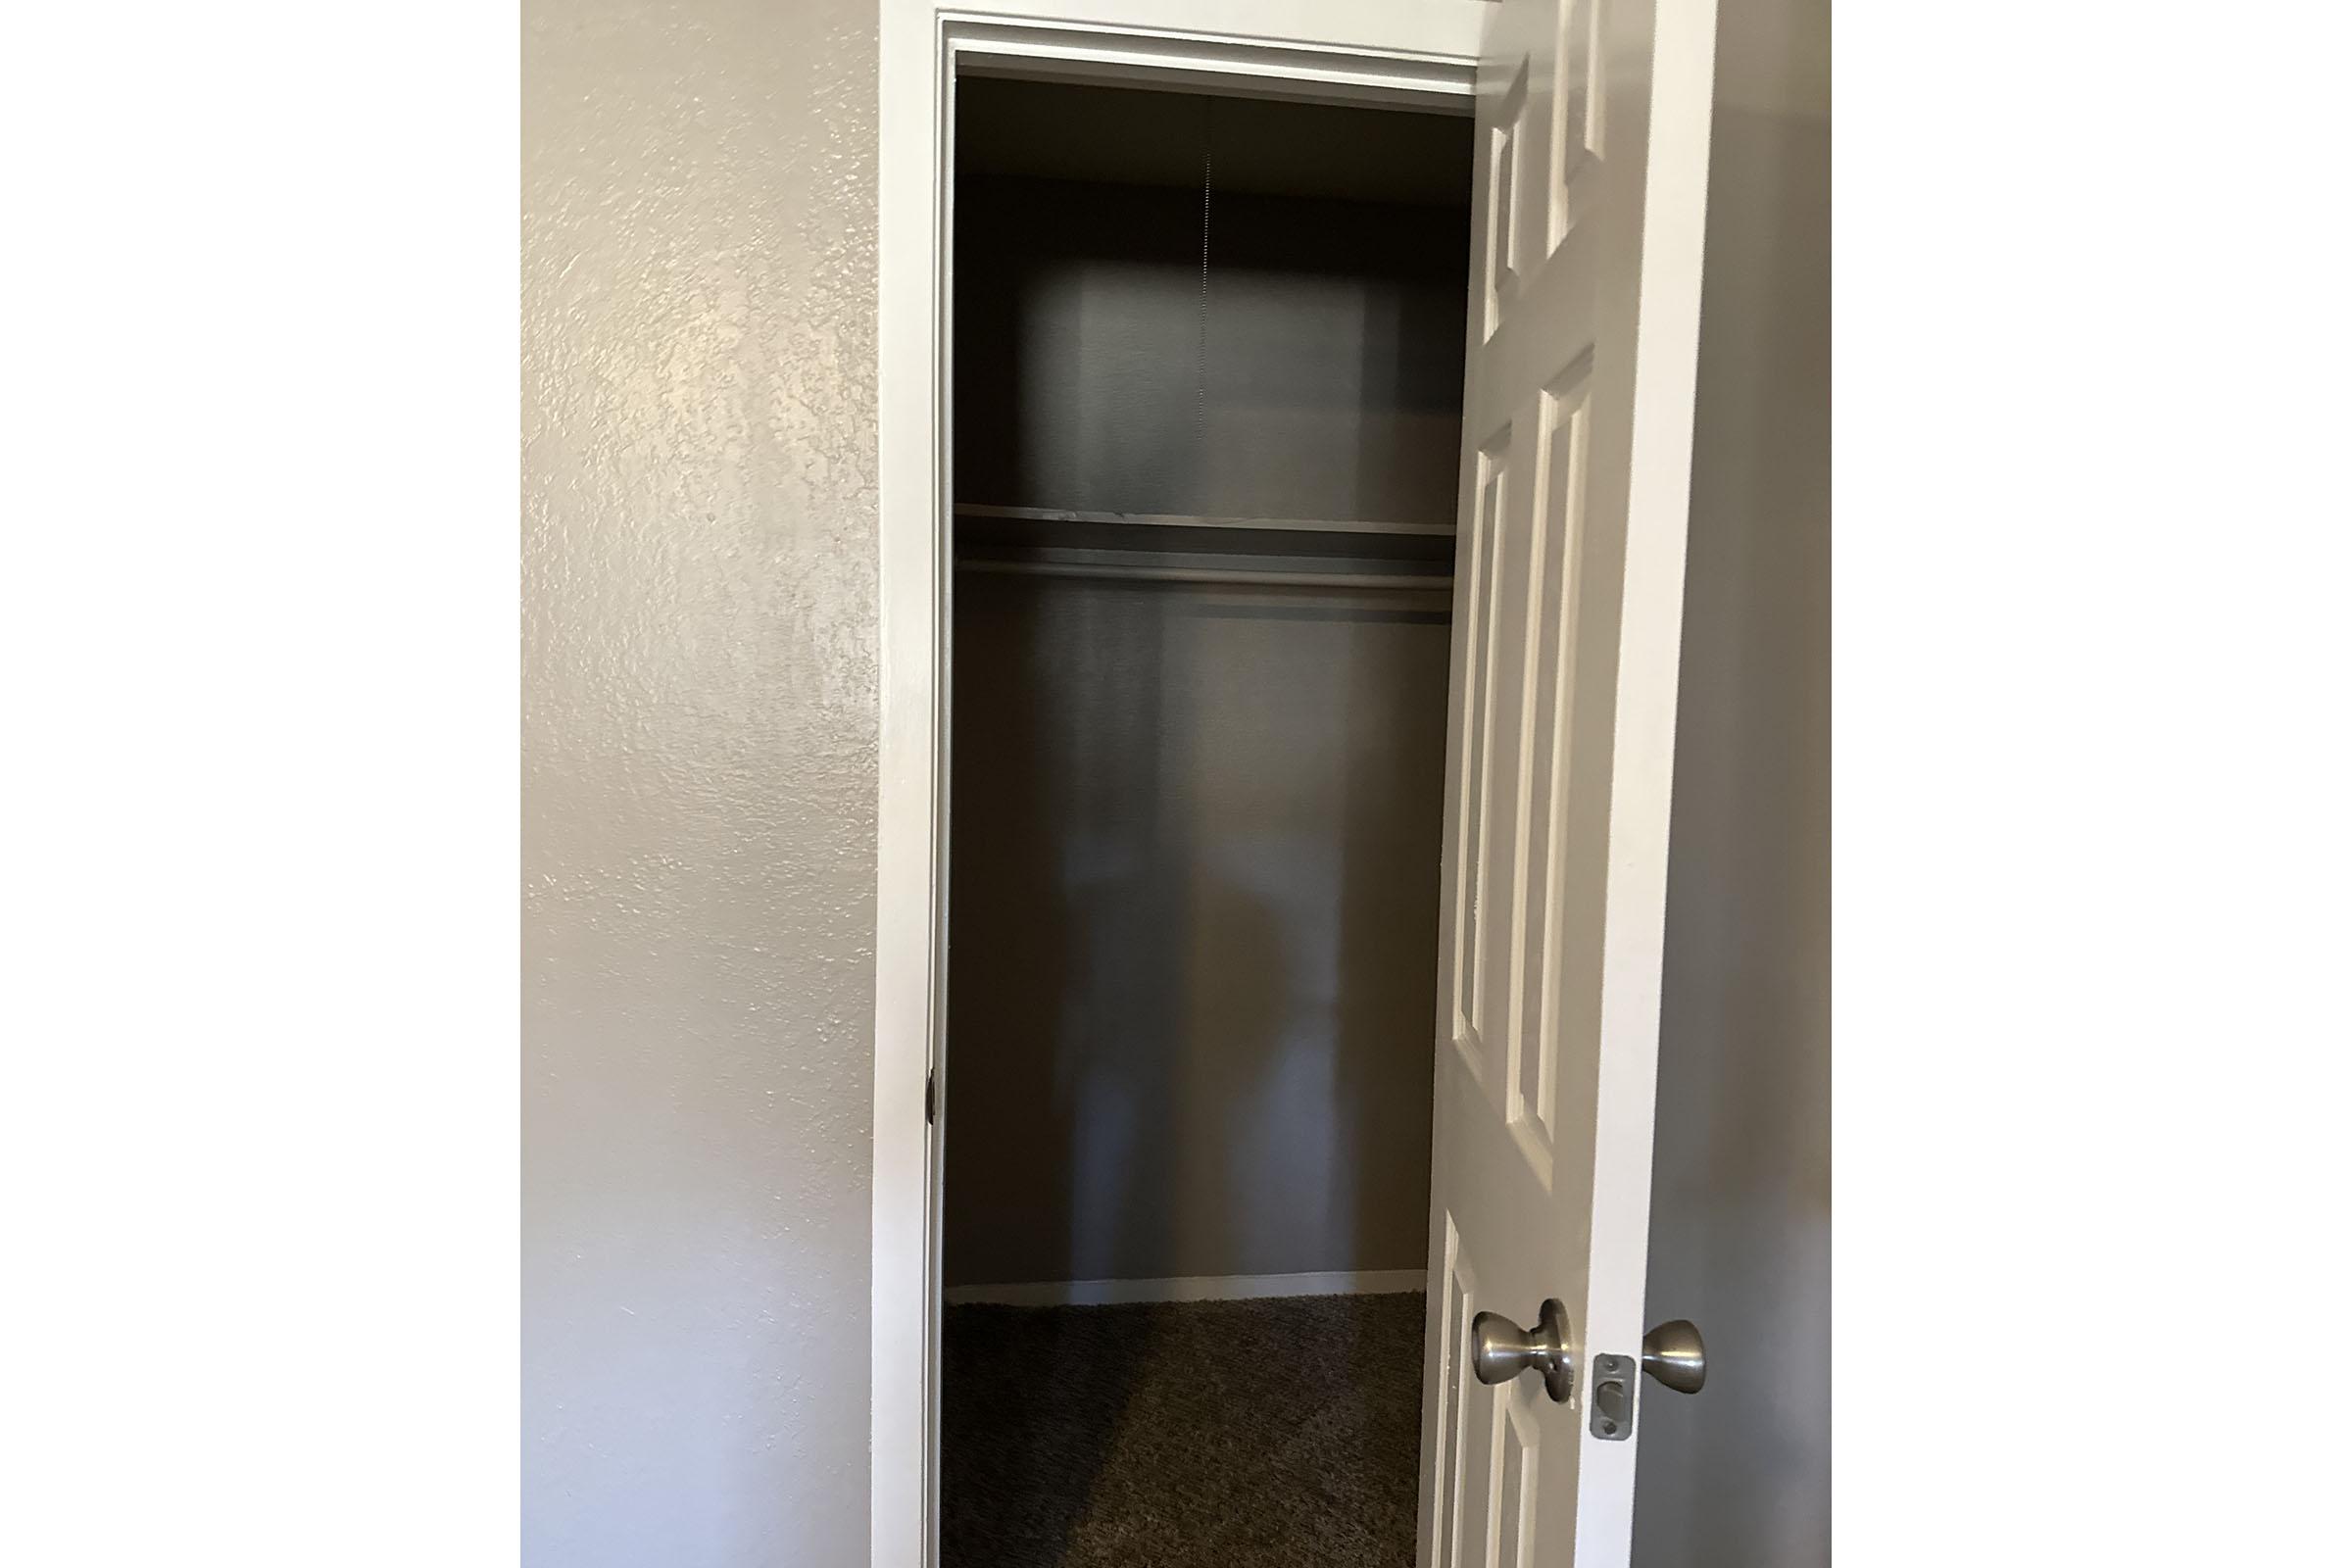 a stainless steel refrigerator with the door open